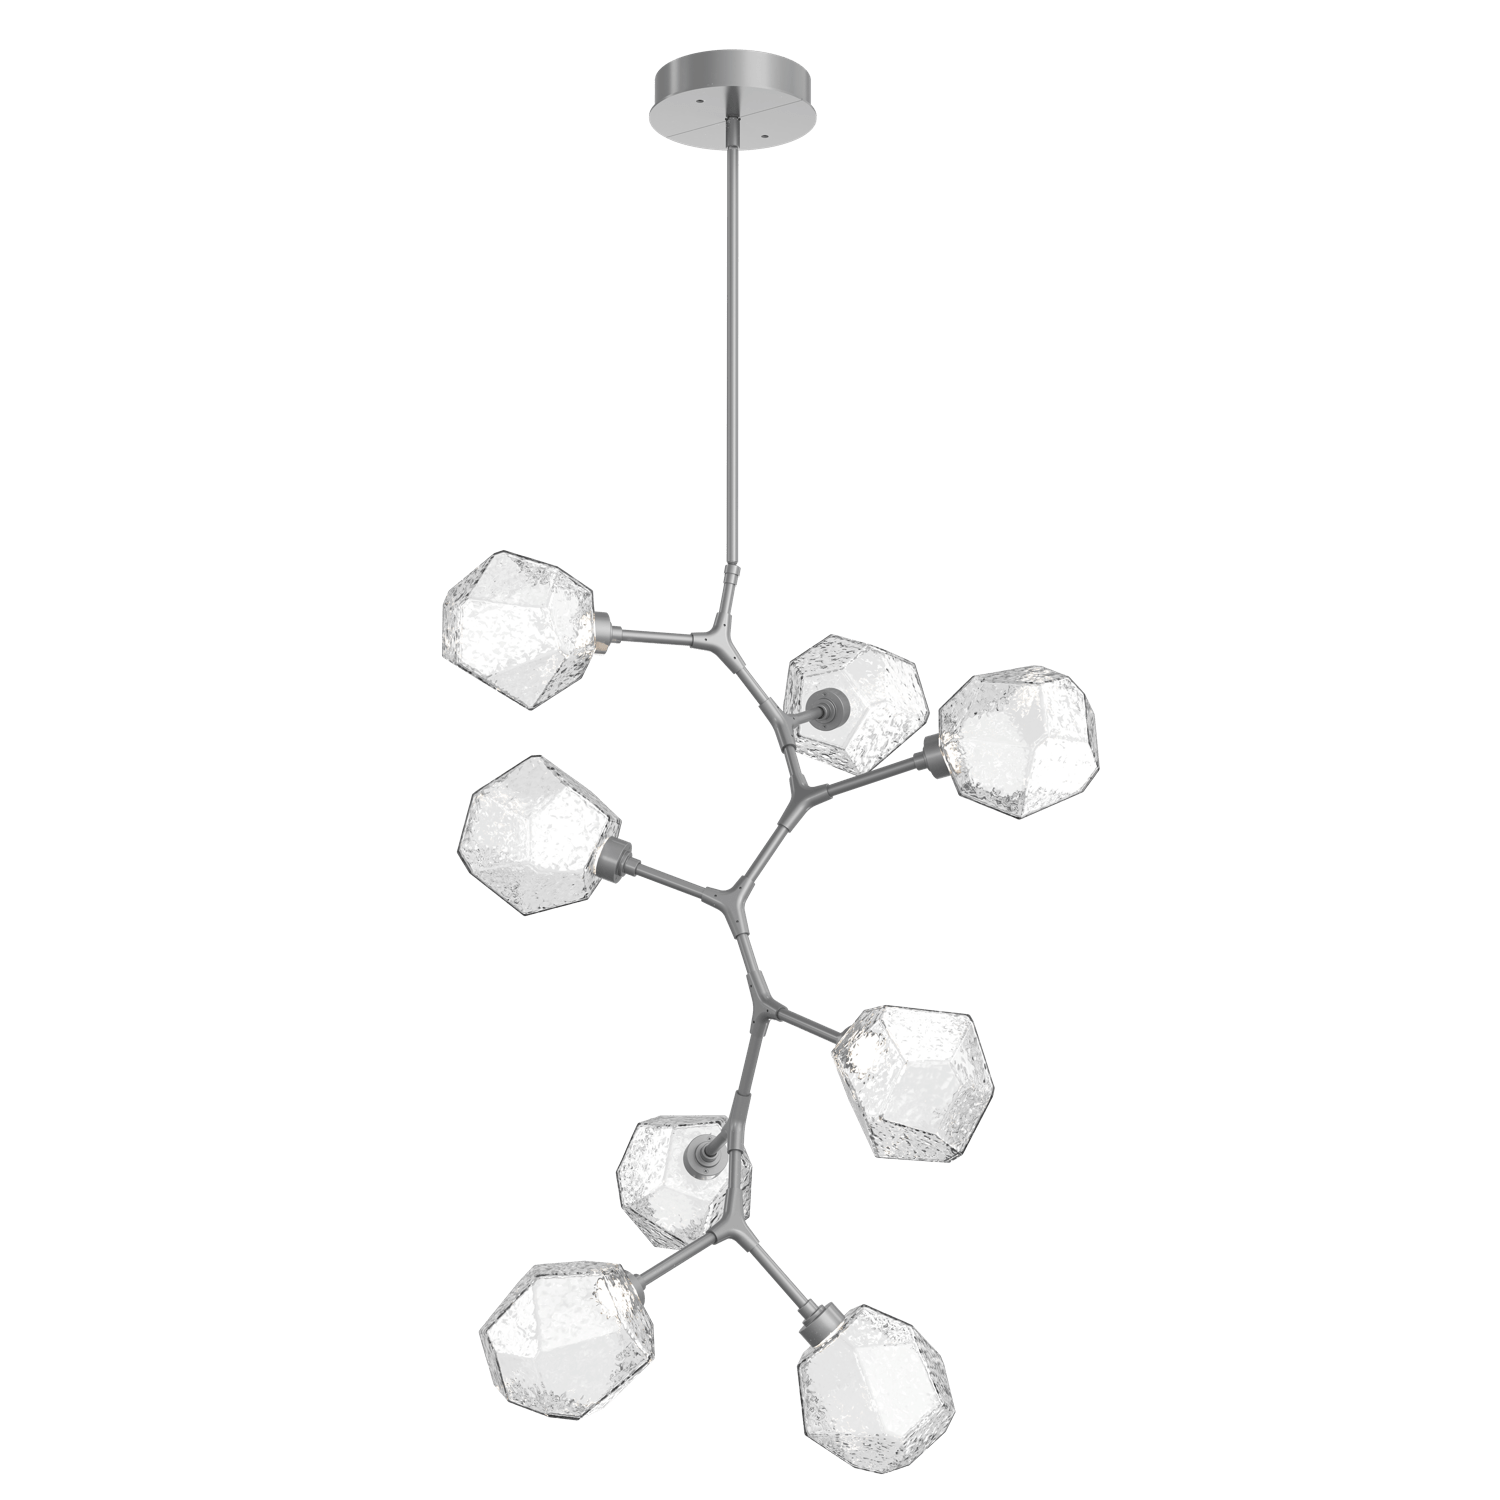 CHB0039-VB-CS-C-Hammerton-Studio-Gem-8-light-modern-vine-chandelier-with-classic-silver-finish-and-clear-blown-glass-shades-and-LED-lamping